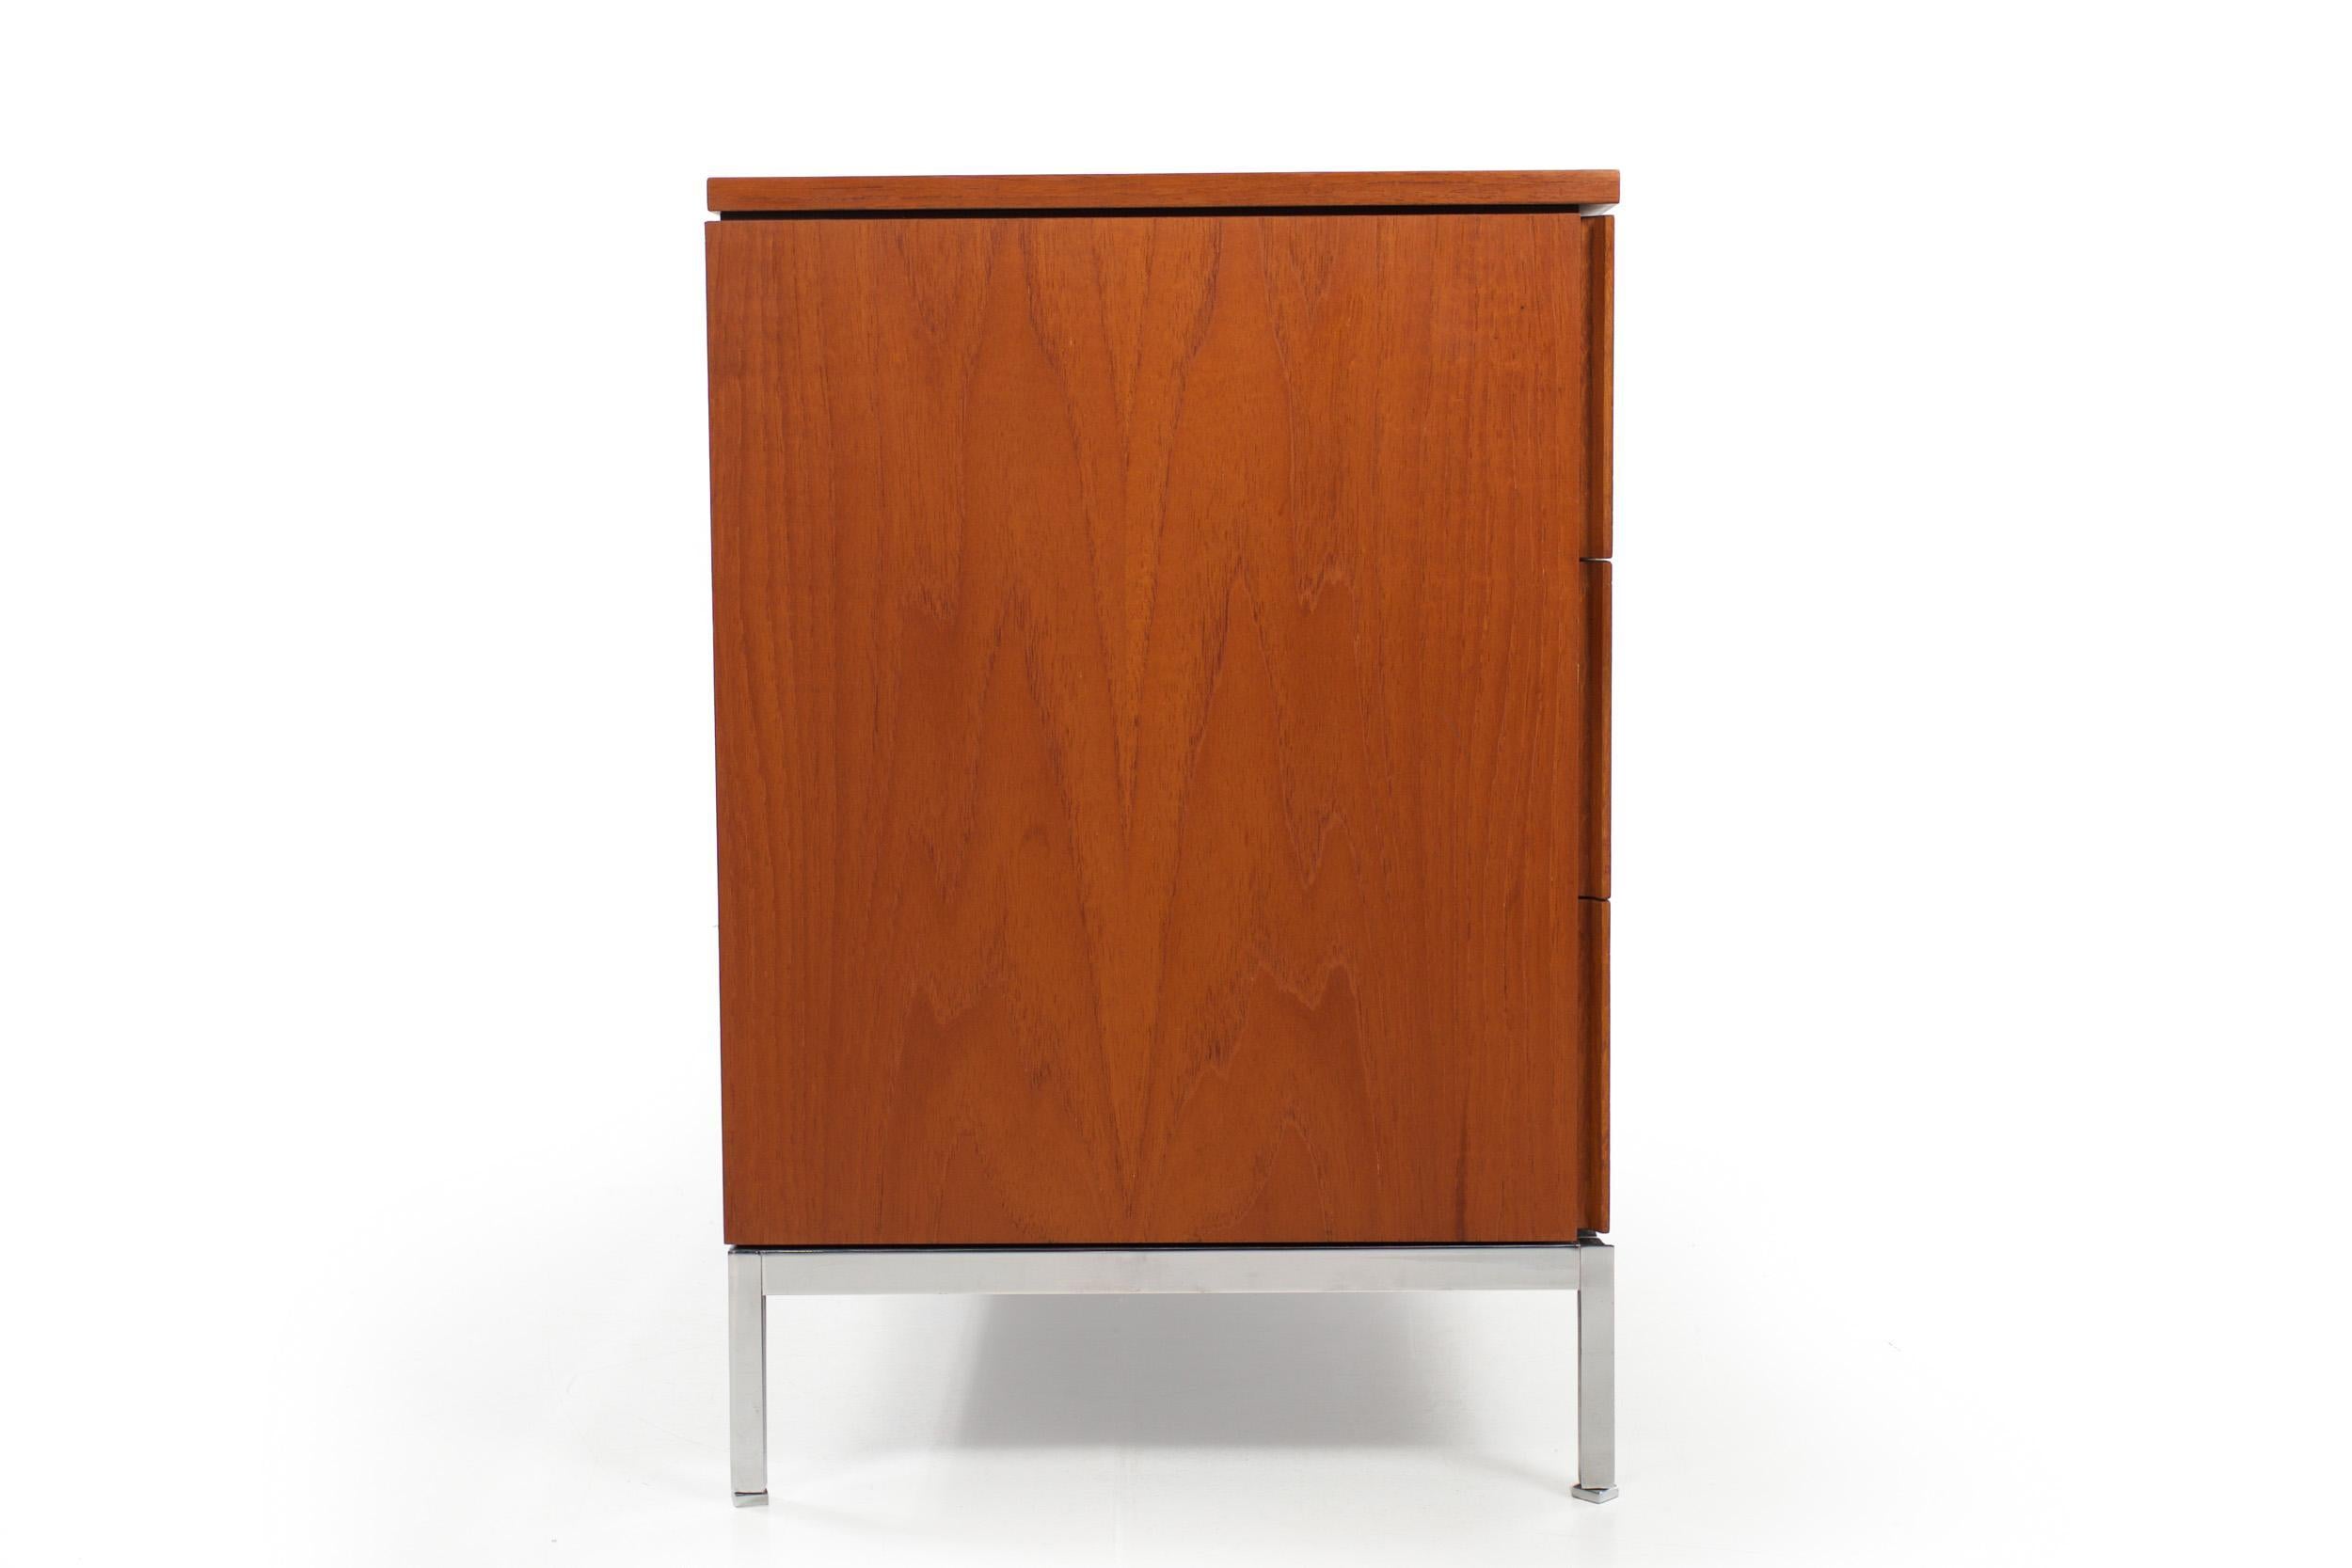 20th Century Knoll Mid-Century Modern Teak and Chrome Double Chest Credenza, circa 1970 For Sale